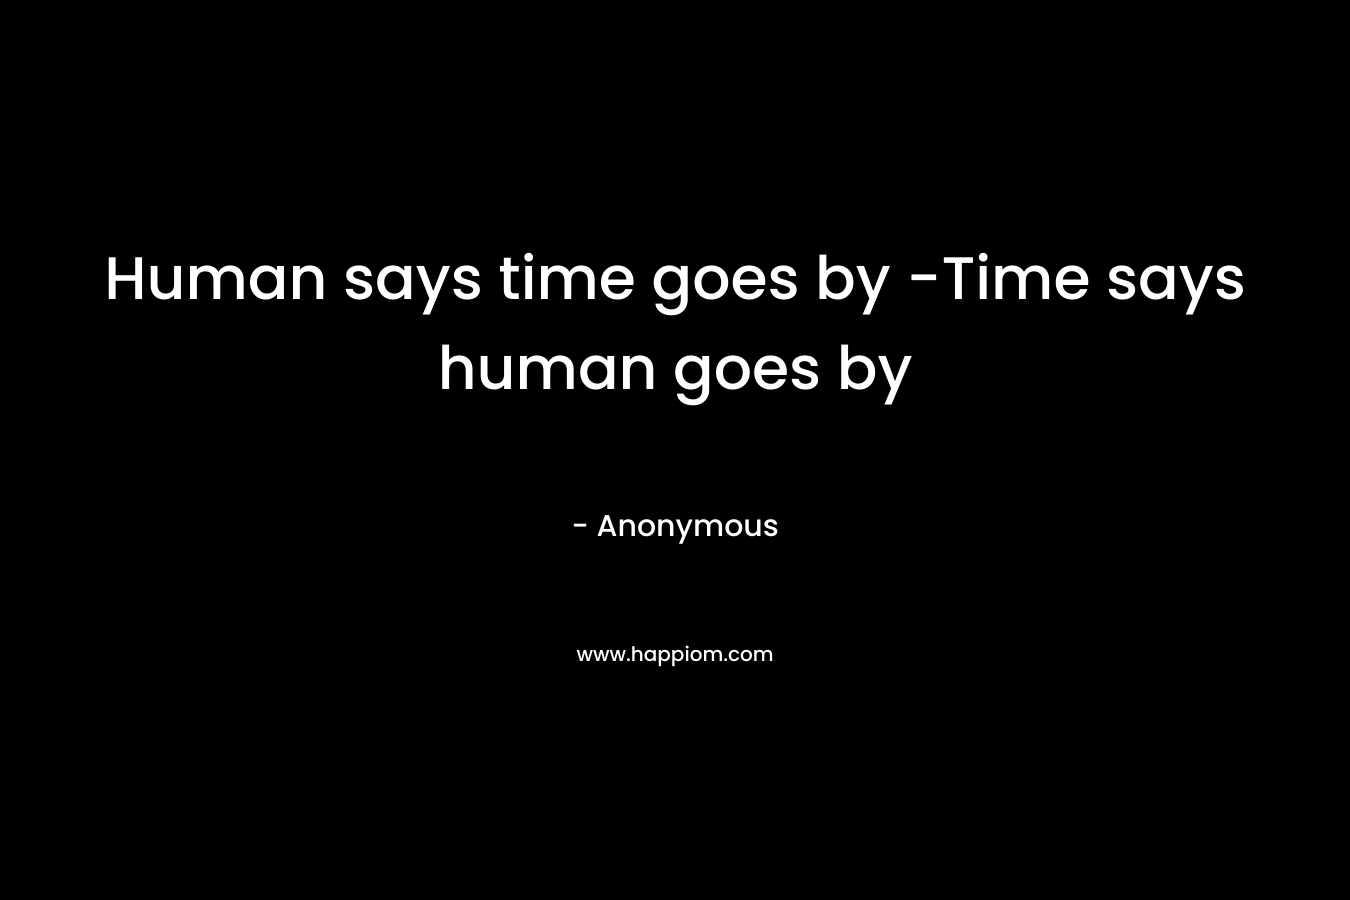 Human says time goes by -Time says human goes by